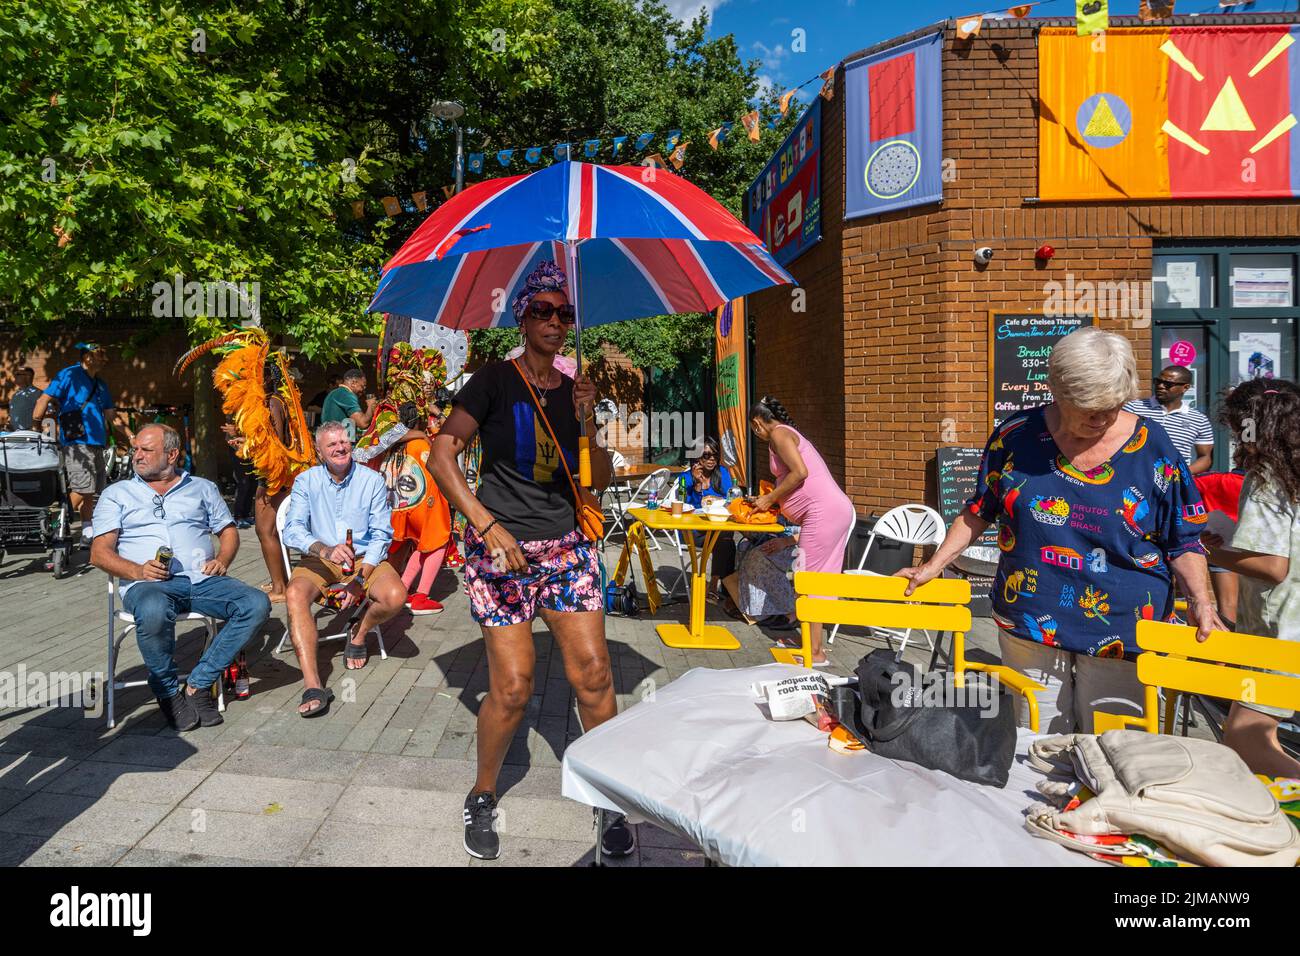 London, UK.  5 August 2022. Members of the public at Carnival in Chelsea, an event showcasing carnival costumes, music and culture.  The show is outside The Chelsea Theatre and is part of this year’s Kensington & Chelsea Festival. Credit: Stephen Chung / Alamy Live News Stock Photo